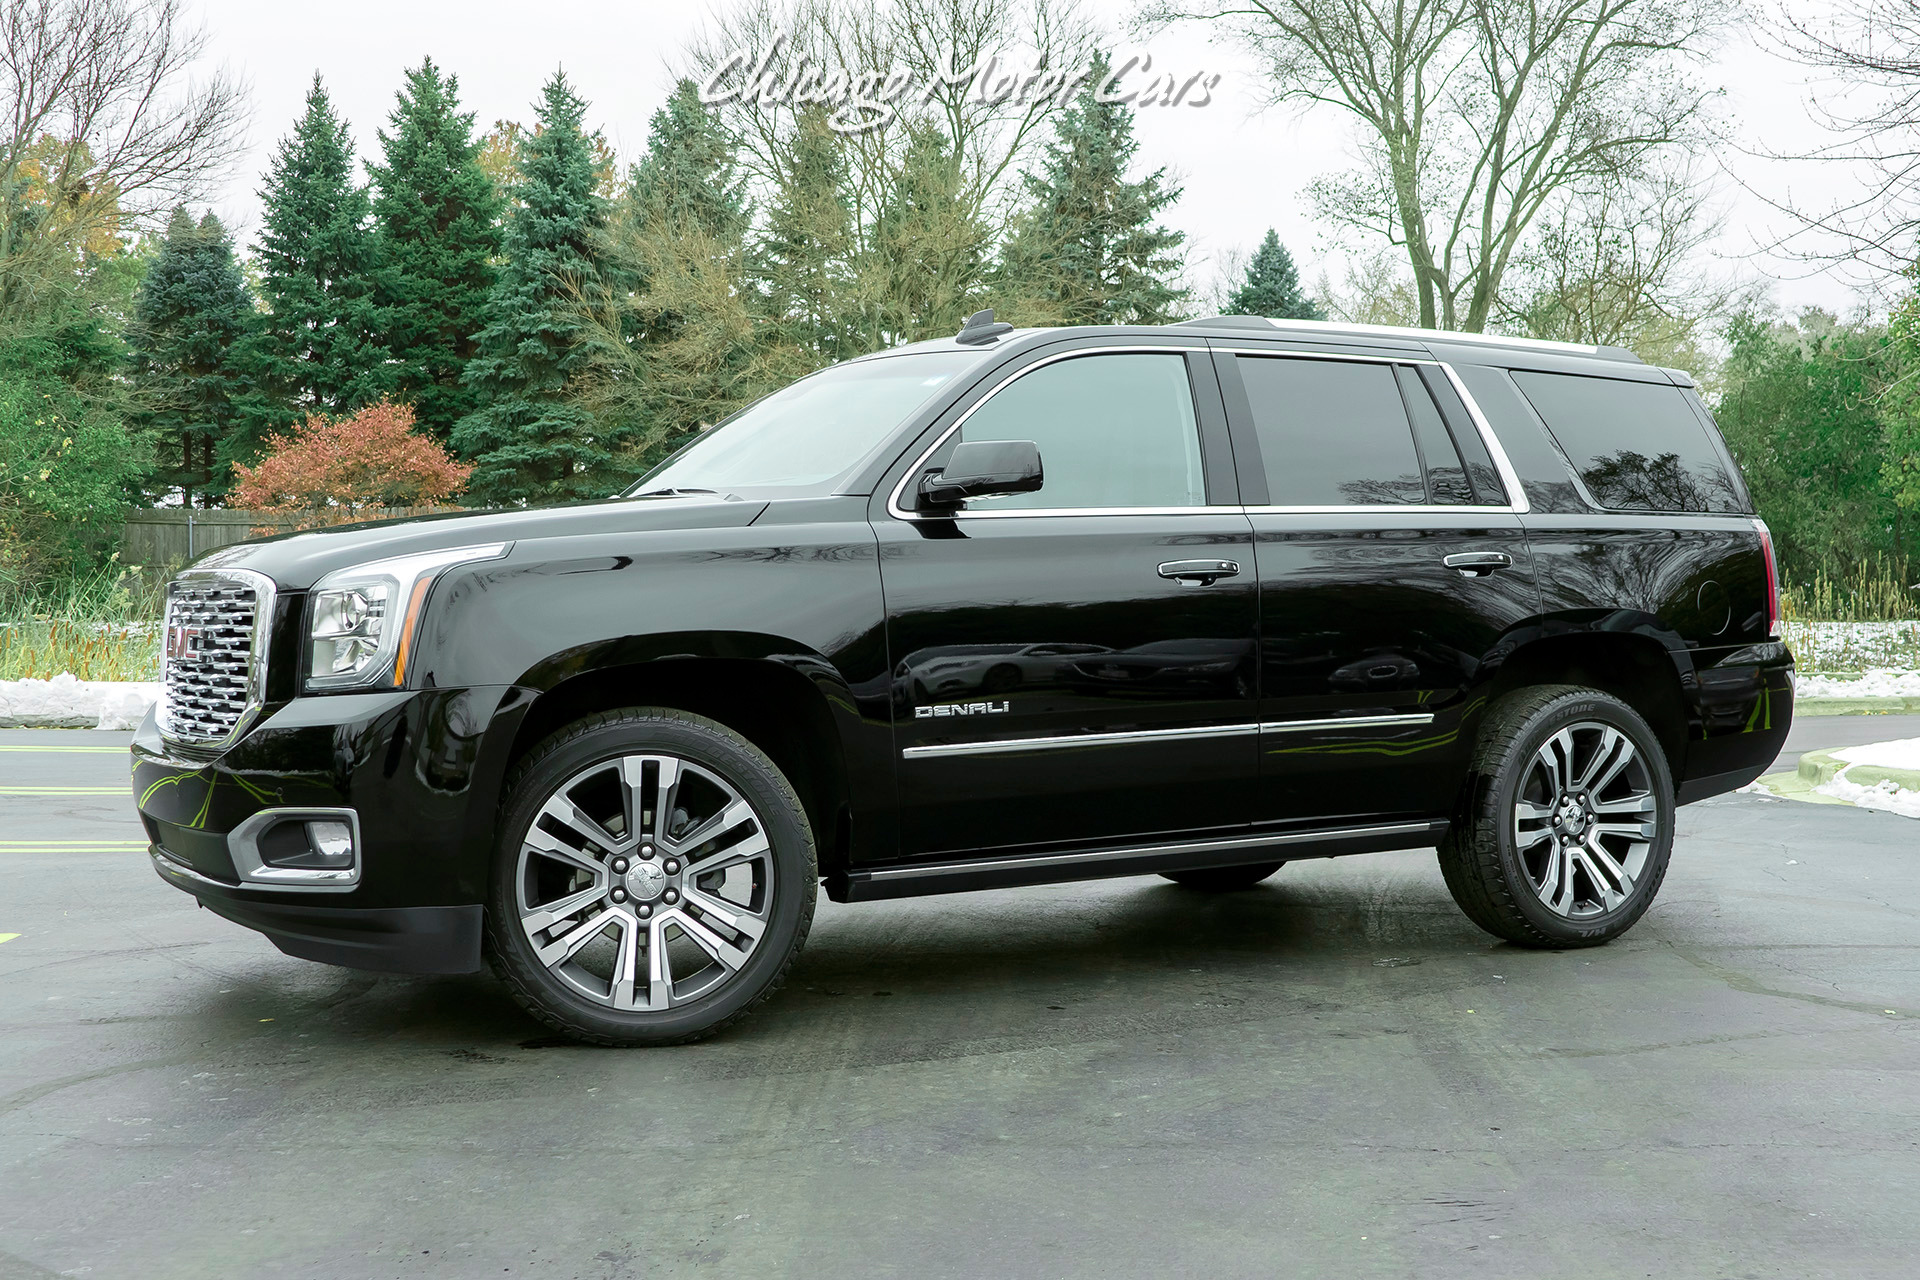 Used-2018-GMC-Yukon-Denali-AWD-SUV-MSRP-77K-DENALI-ULTIMATE-PACKAGE-ONLY-ONE-OWNER